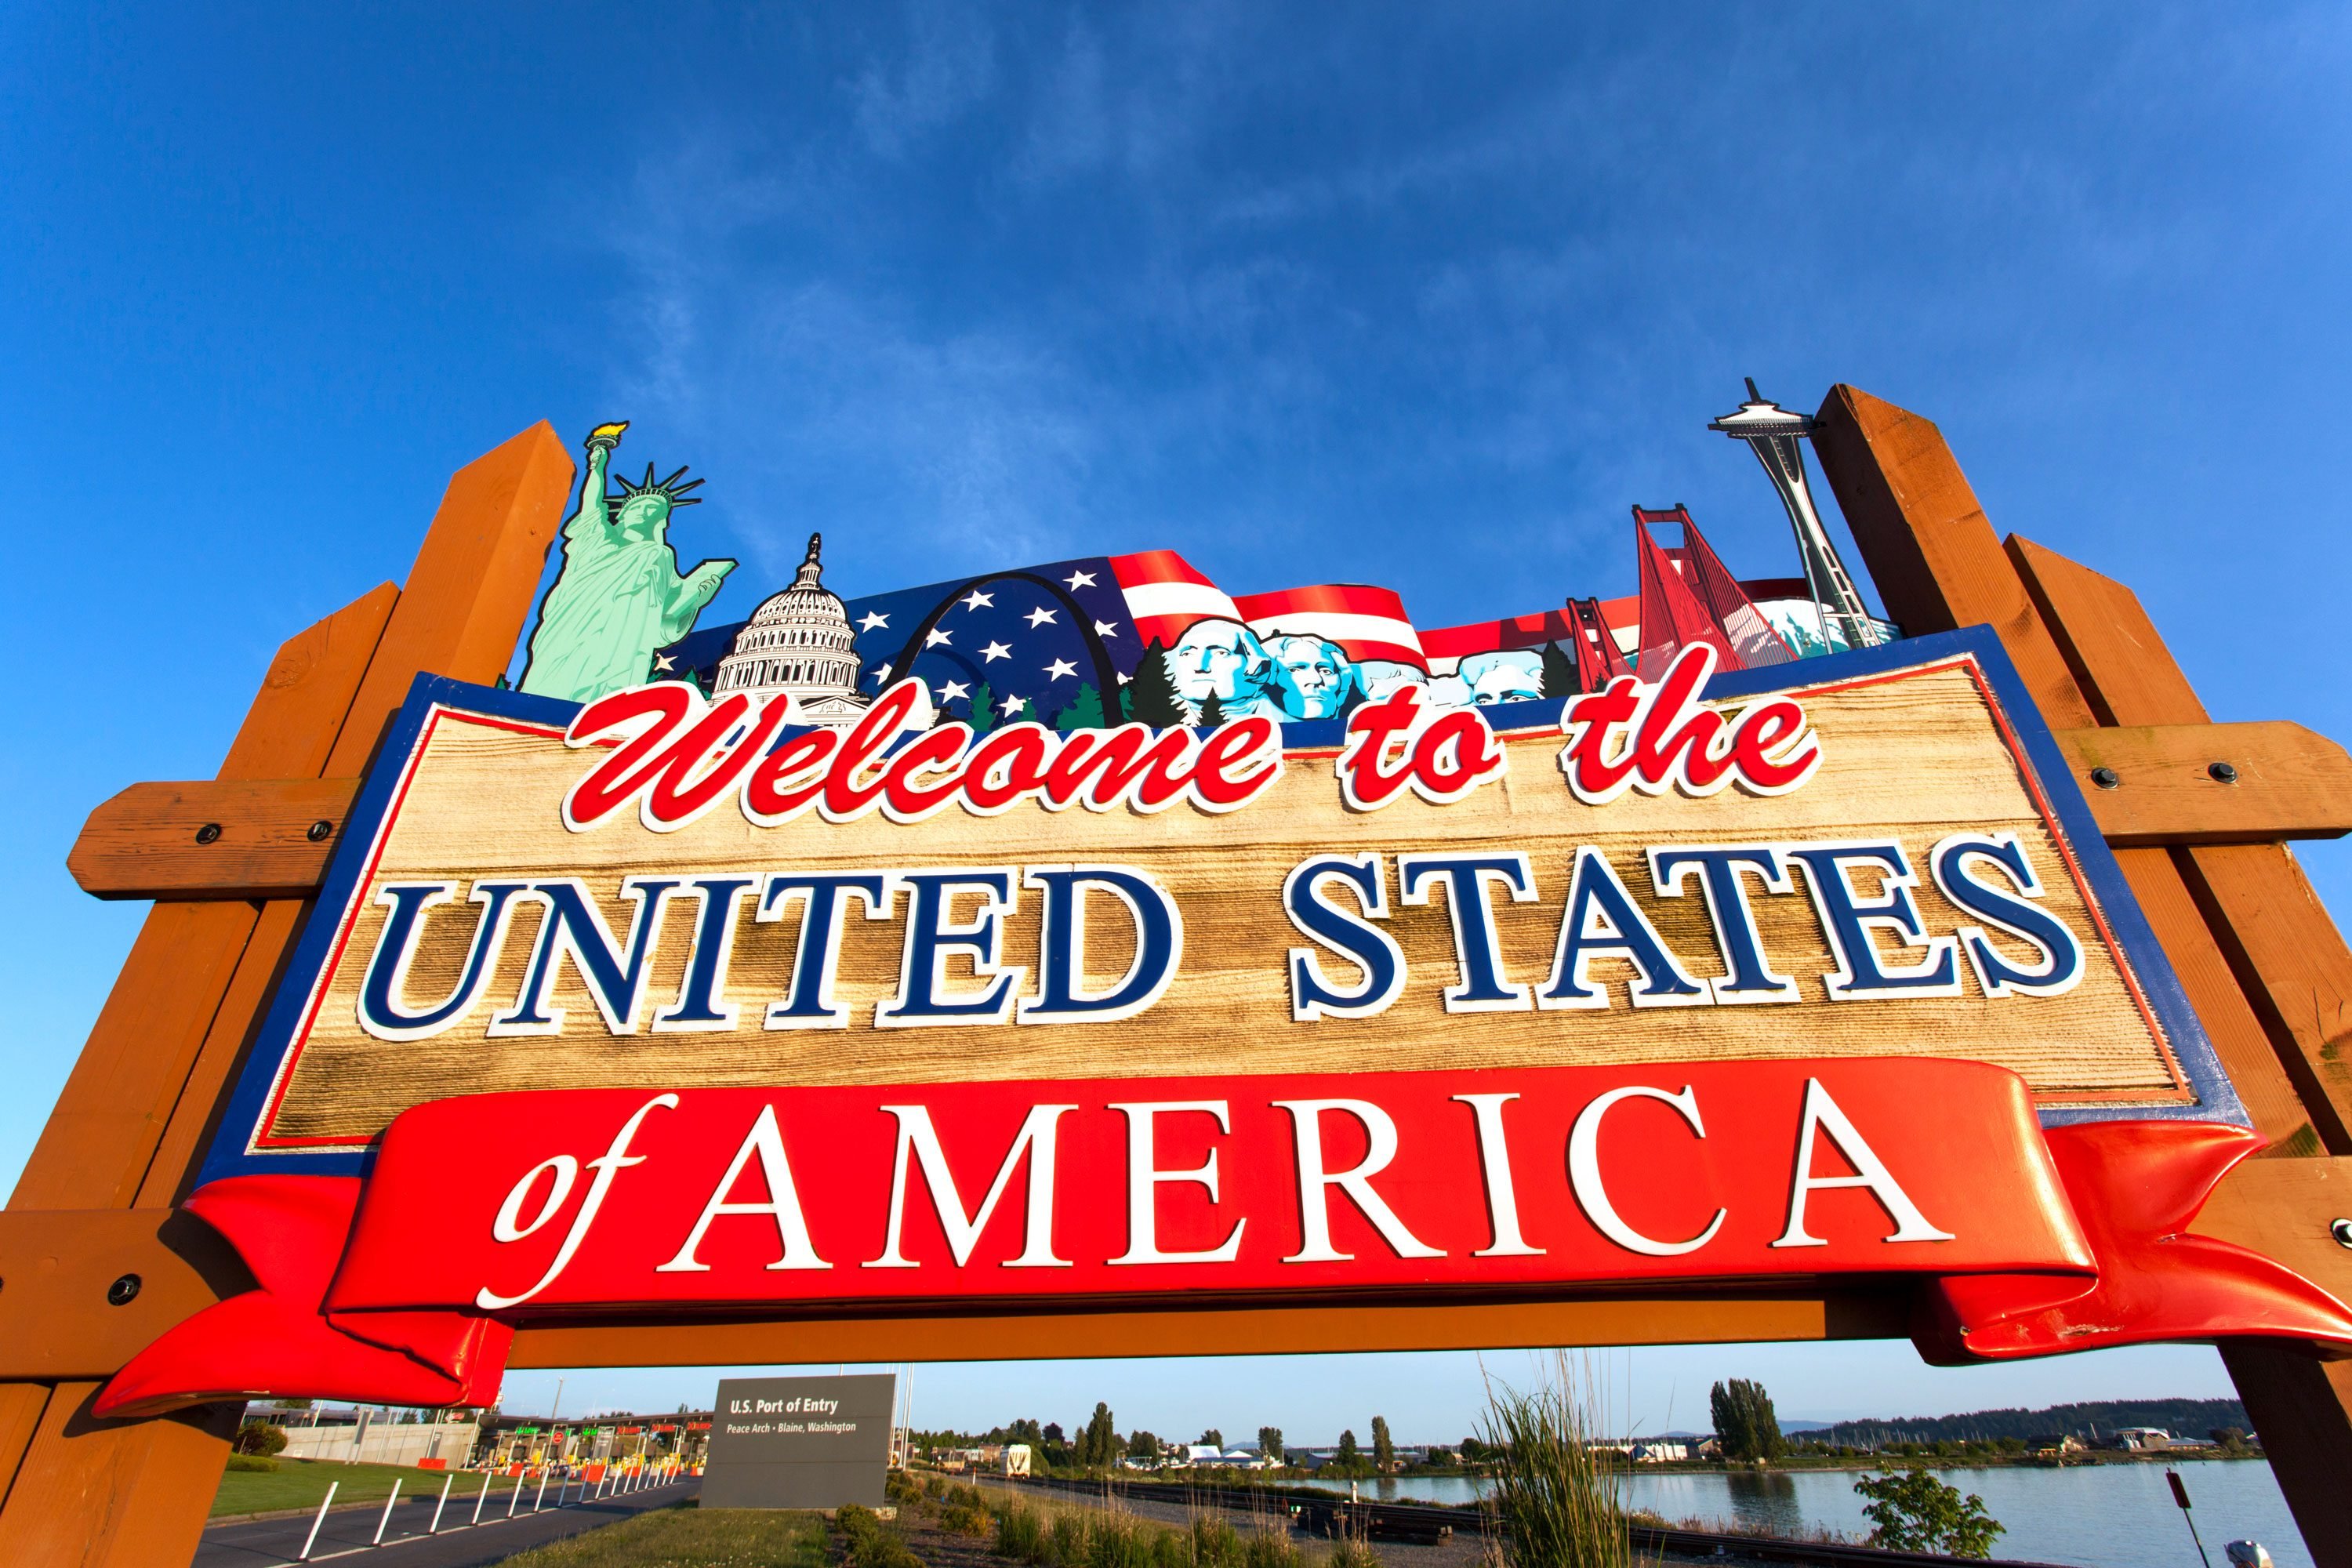 The Wisconsin Welcome Sign is seen in Pleasant Prairie, Wisconsin, on  News Photo - Getty Images